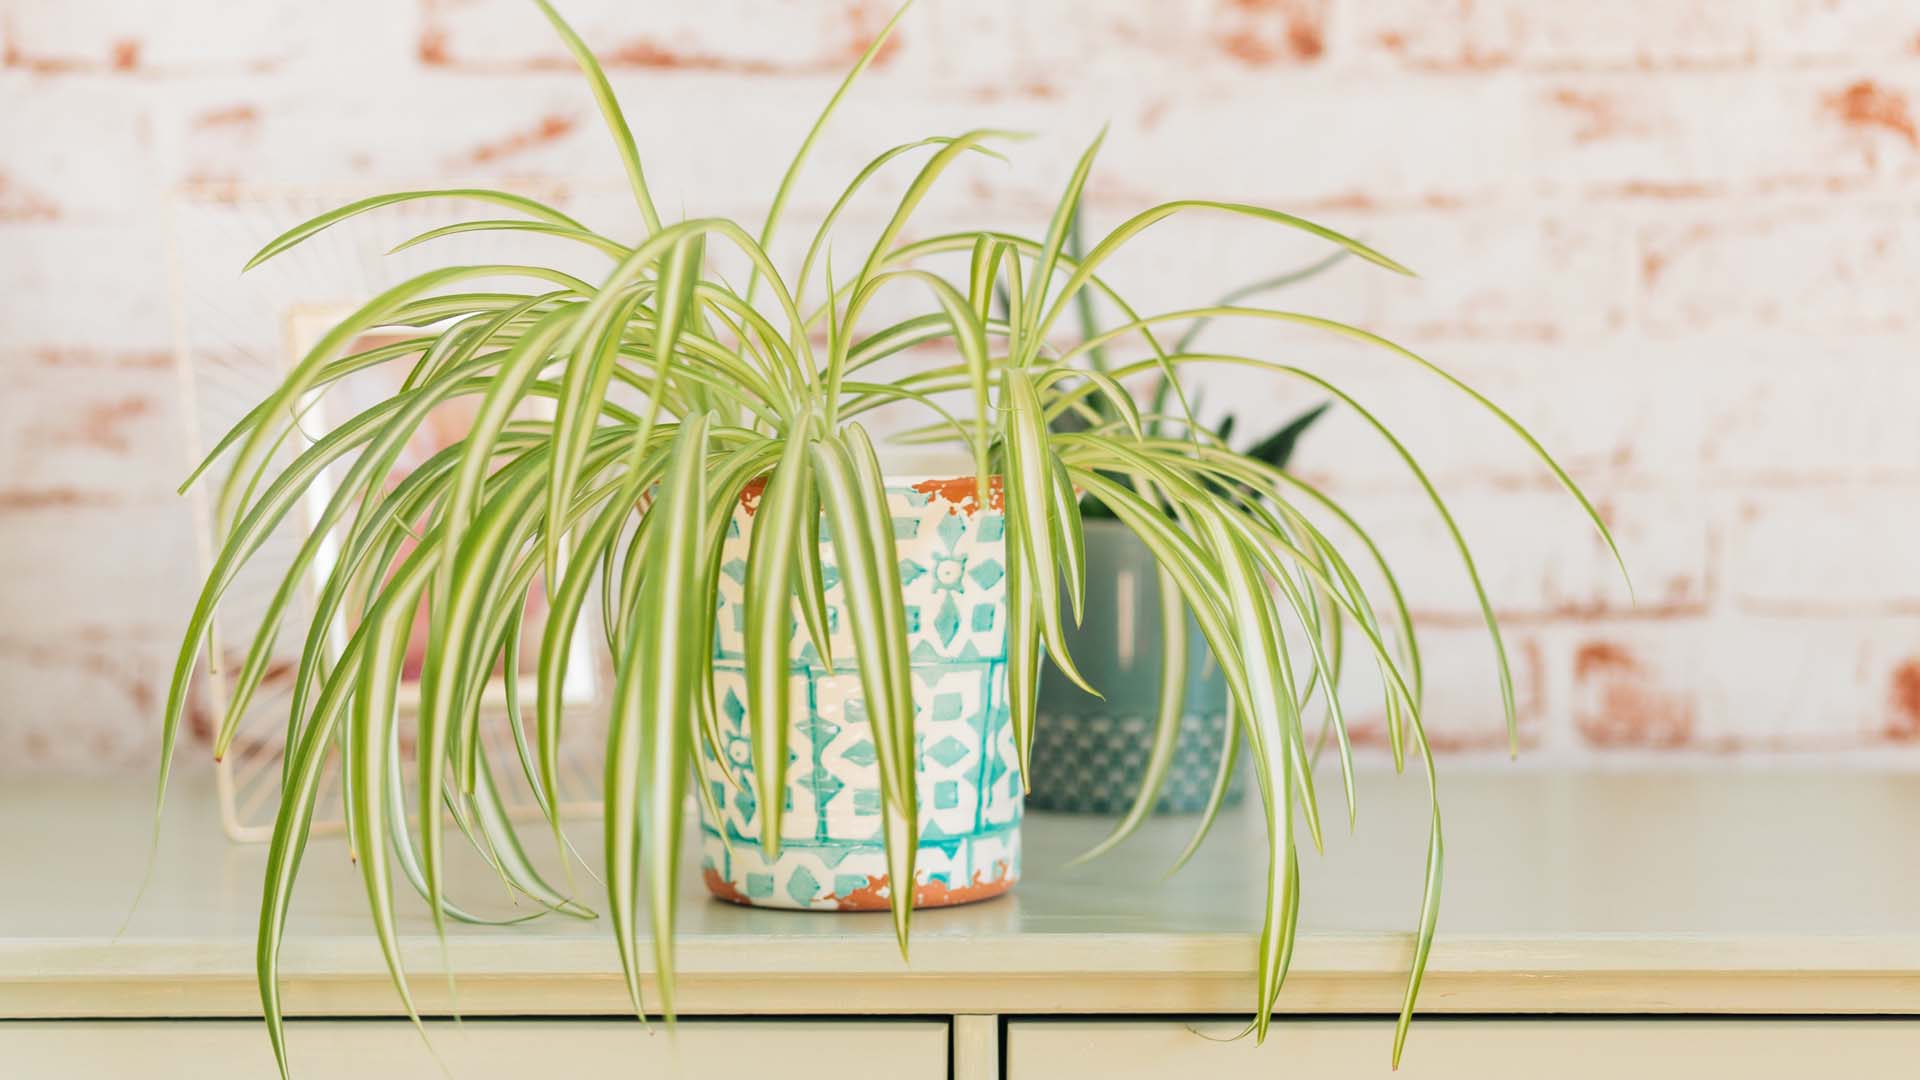 Chlorophytum Comosum on mint green shelf in front of red and white brick wallpaper background